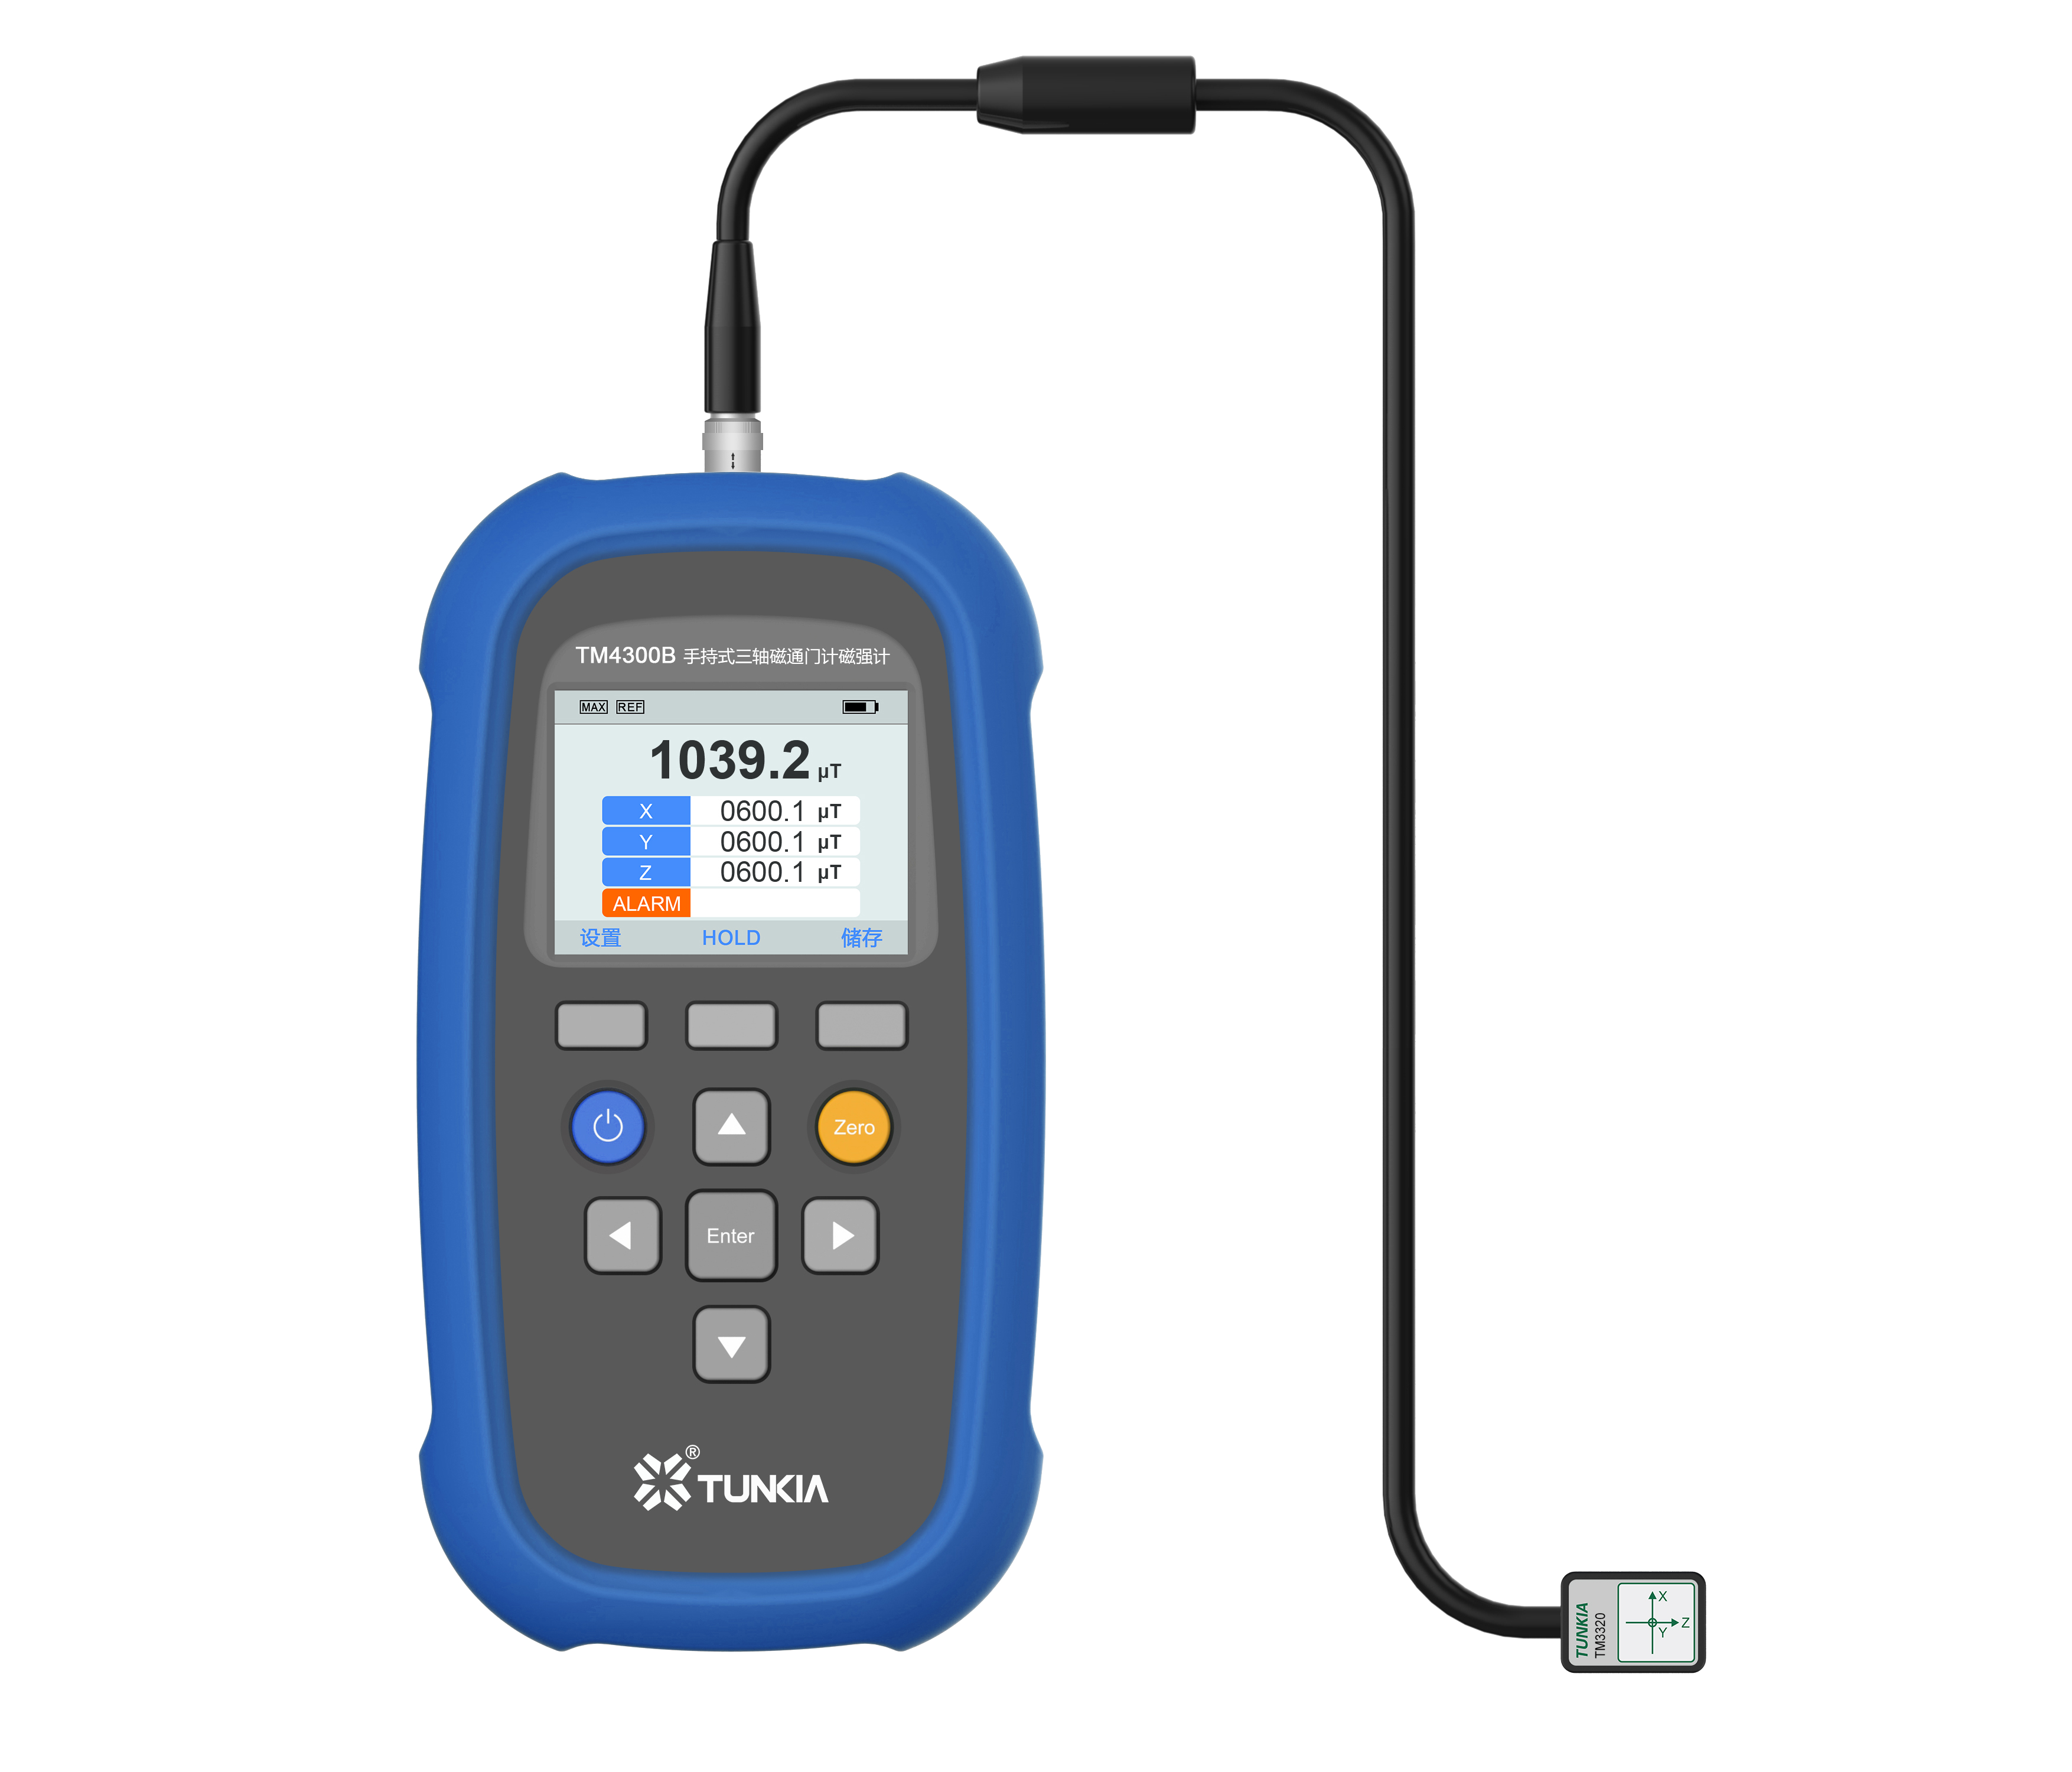 TM4300B Hand-held Triaxial Fluxgate Magnetometer